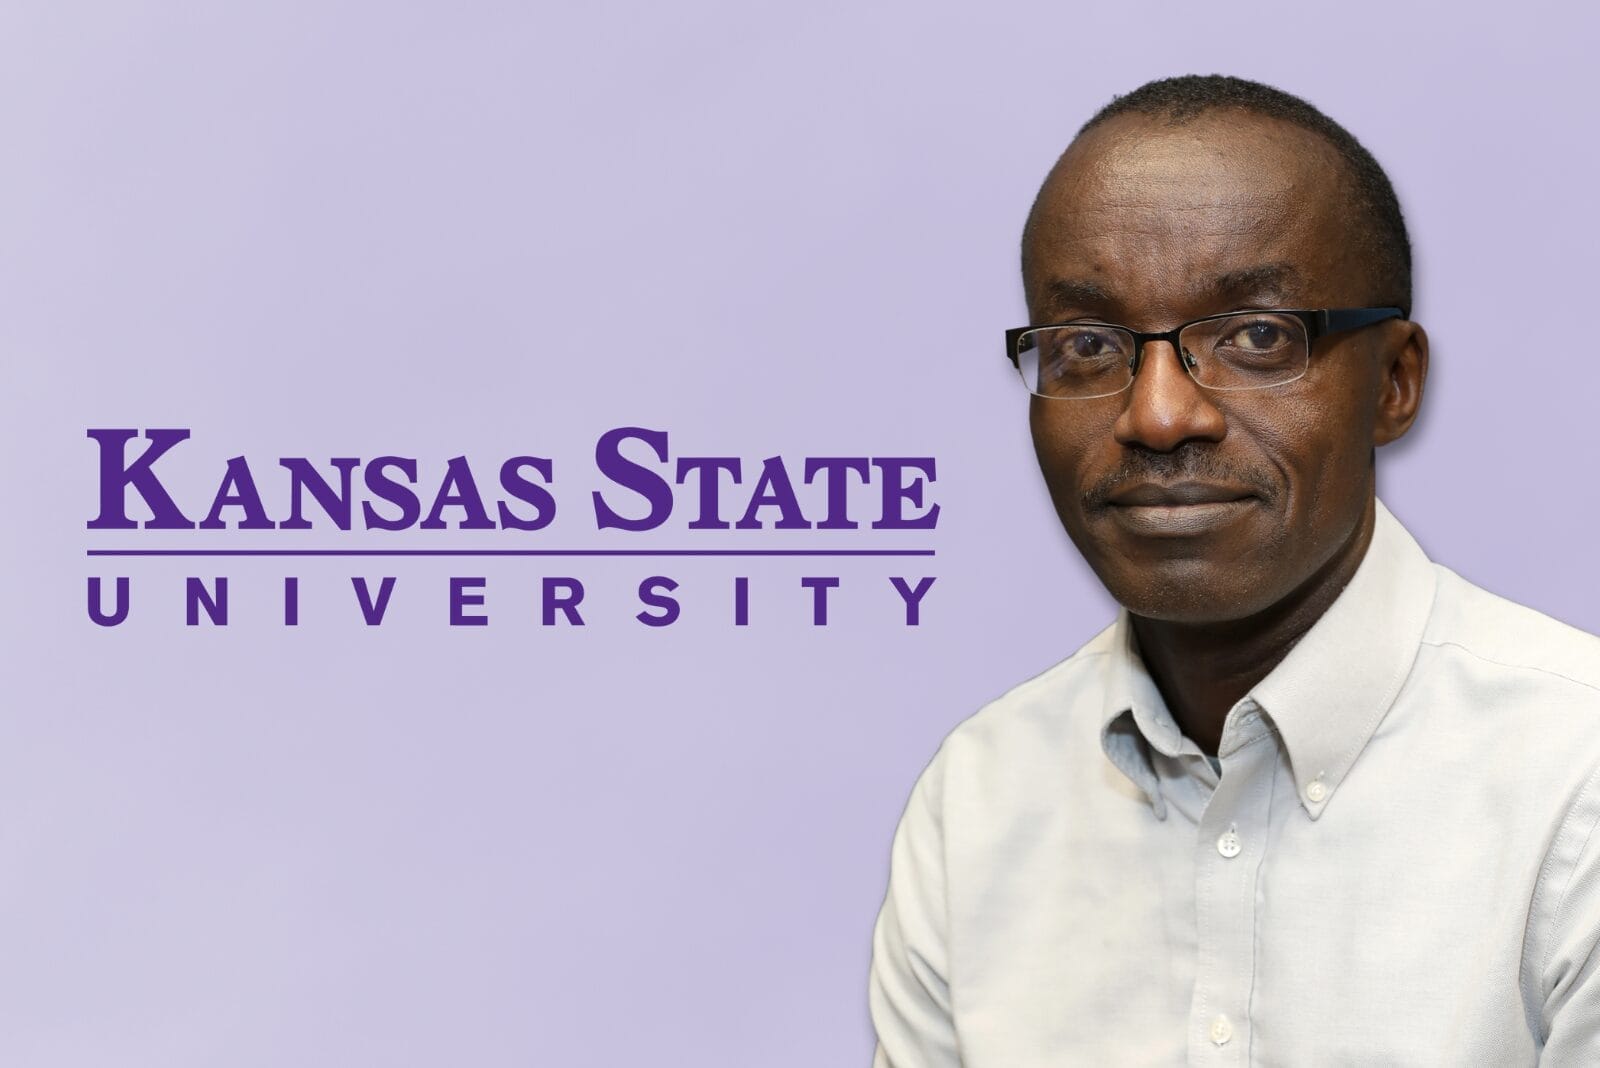 Picture of Joseph Awika with the K-State logo on purple background.